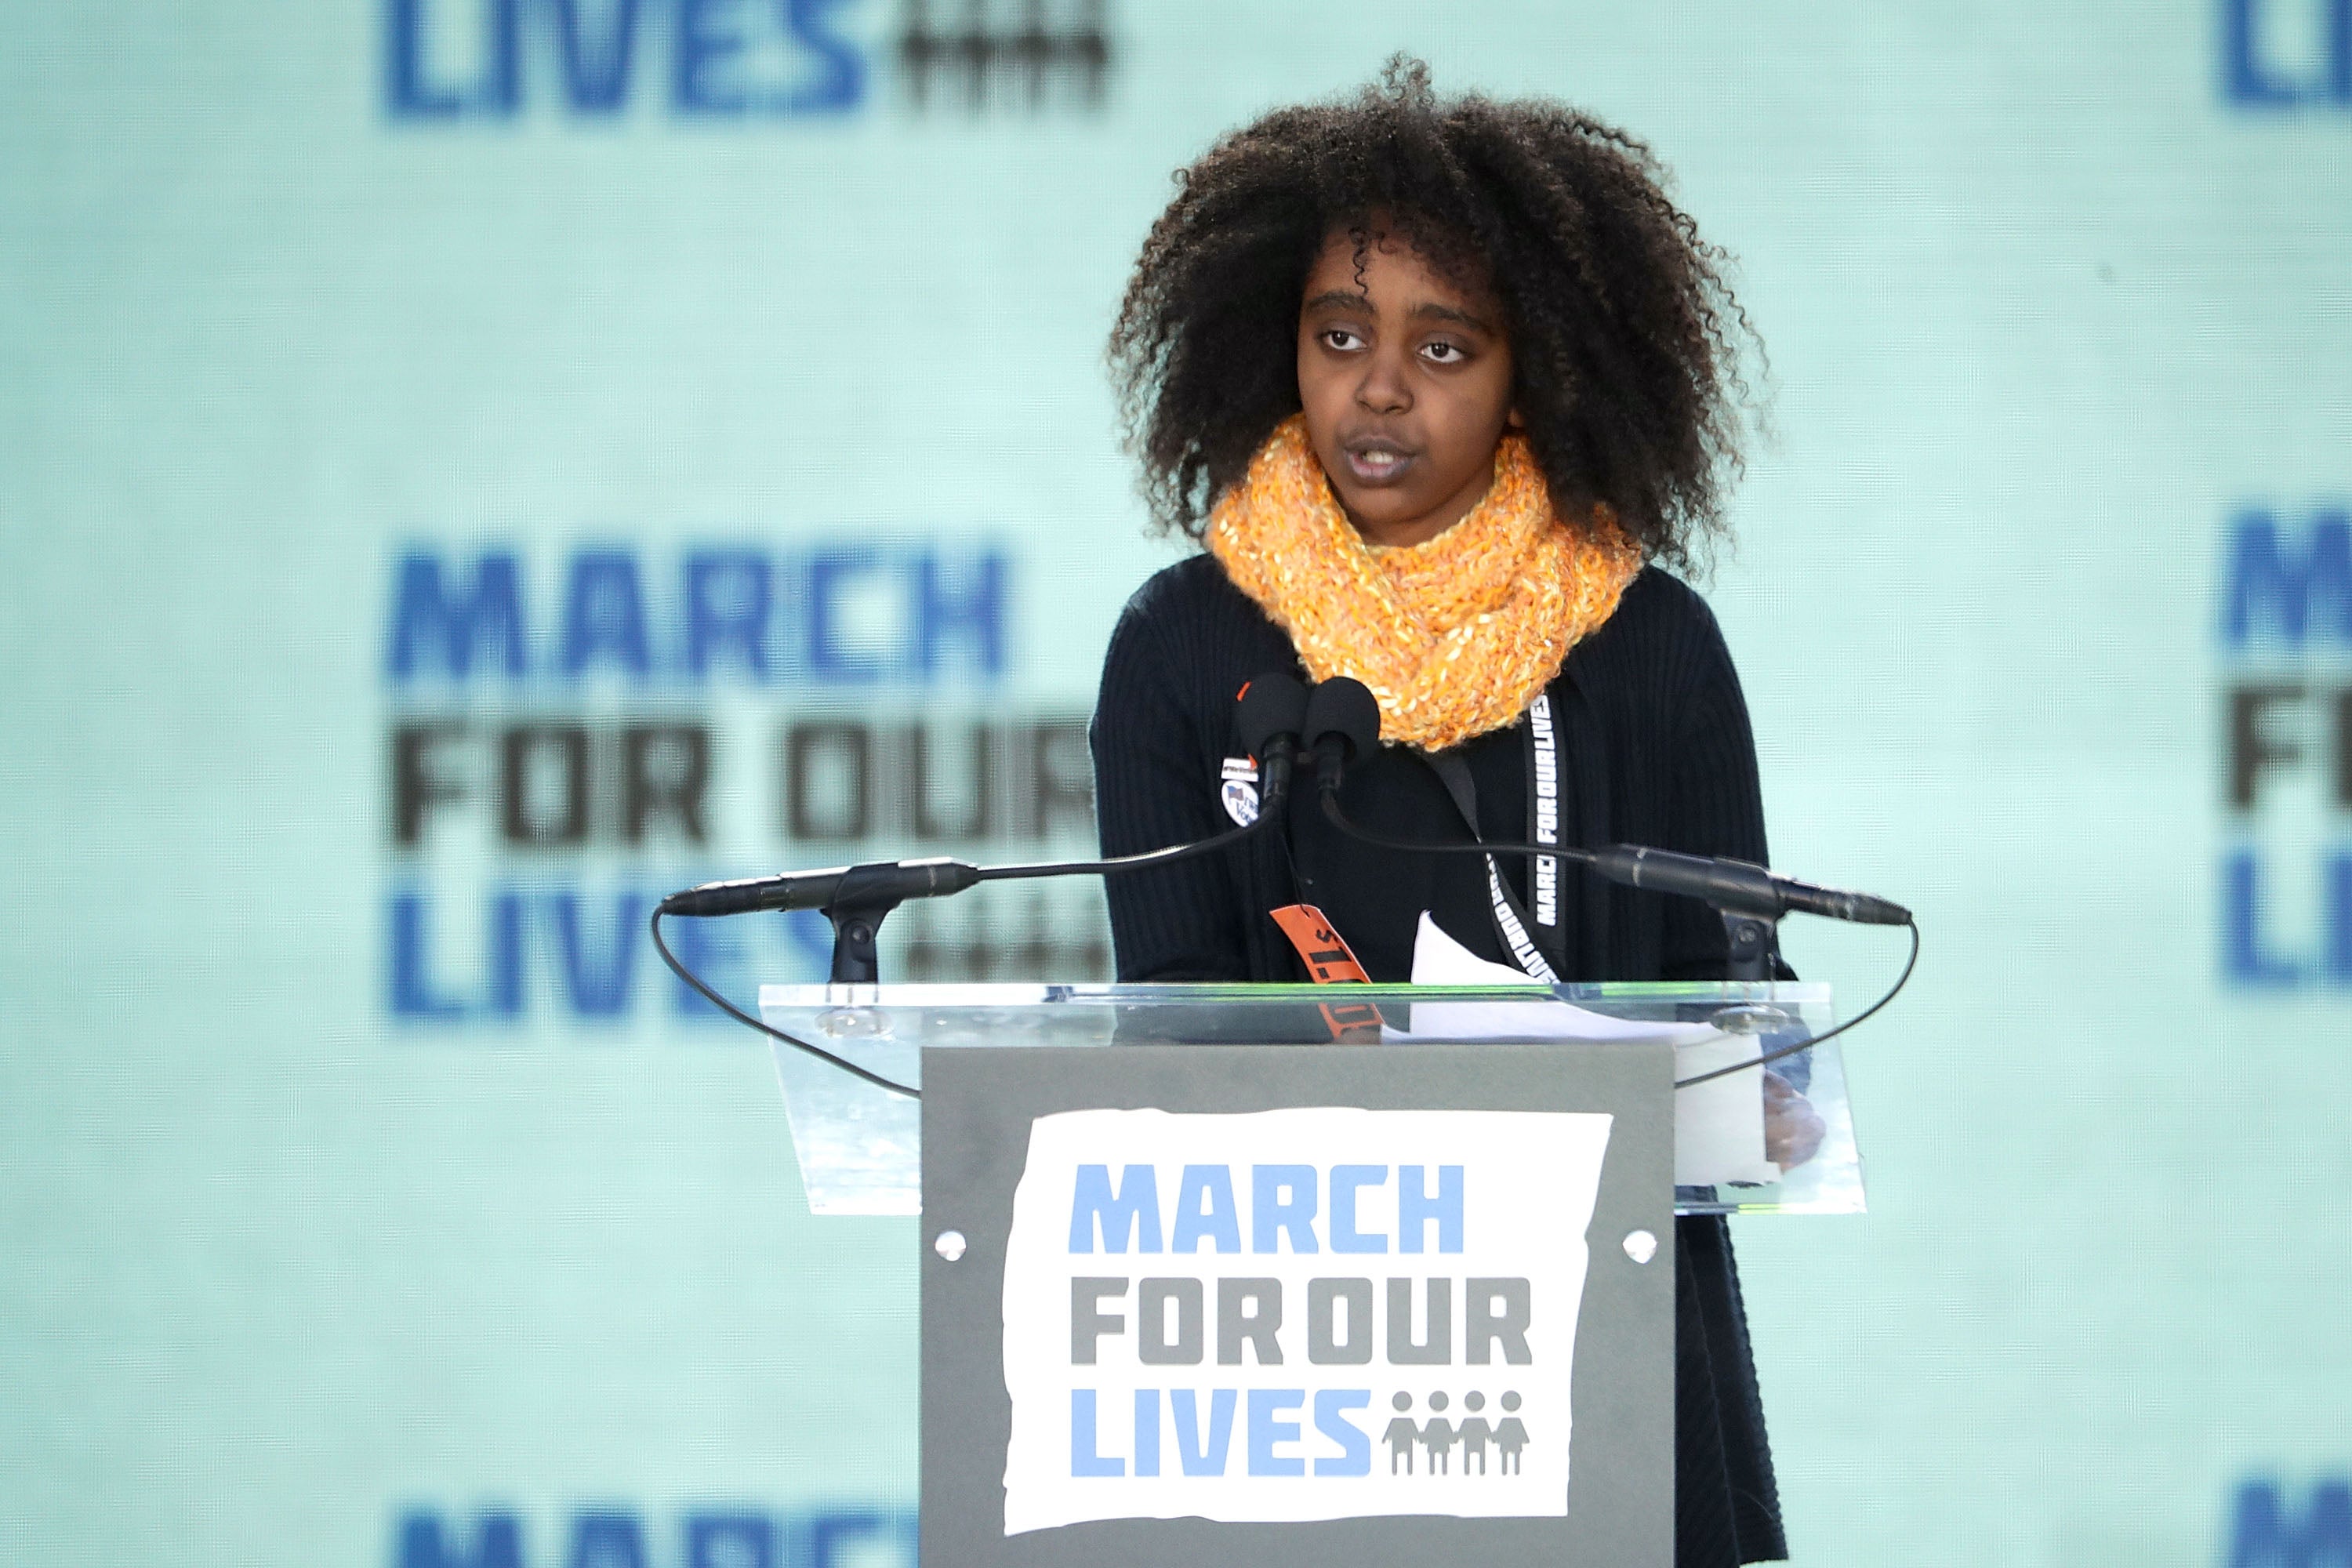 Fifth Grader Naomi Wadler Reminds 'March For Our Lives' Rally To Honor Black Girls Too
